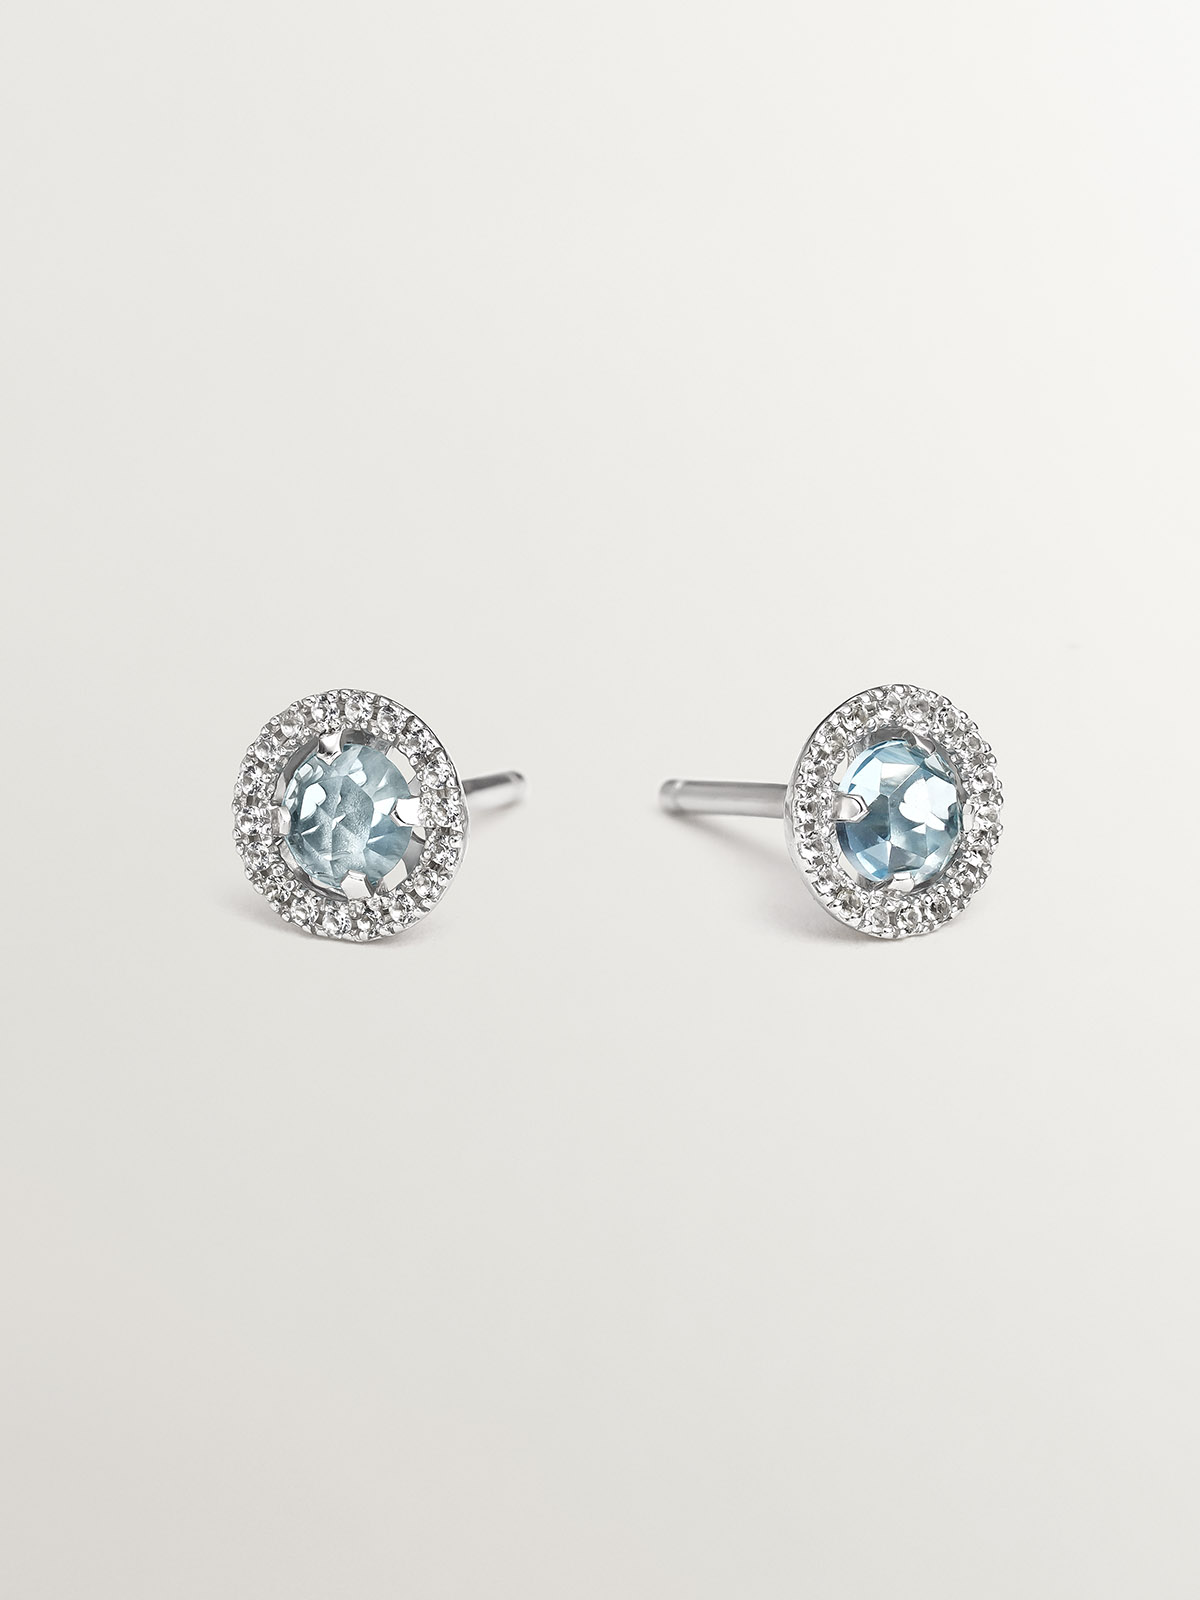 925 Silver Button Earrings with 0.82 cts blue topaz and white sapphire halo